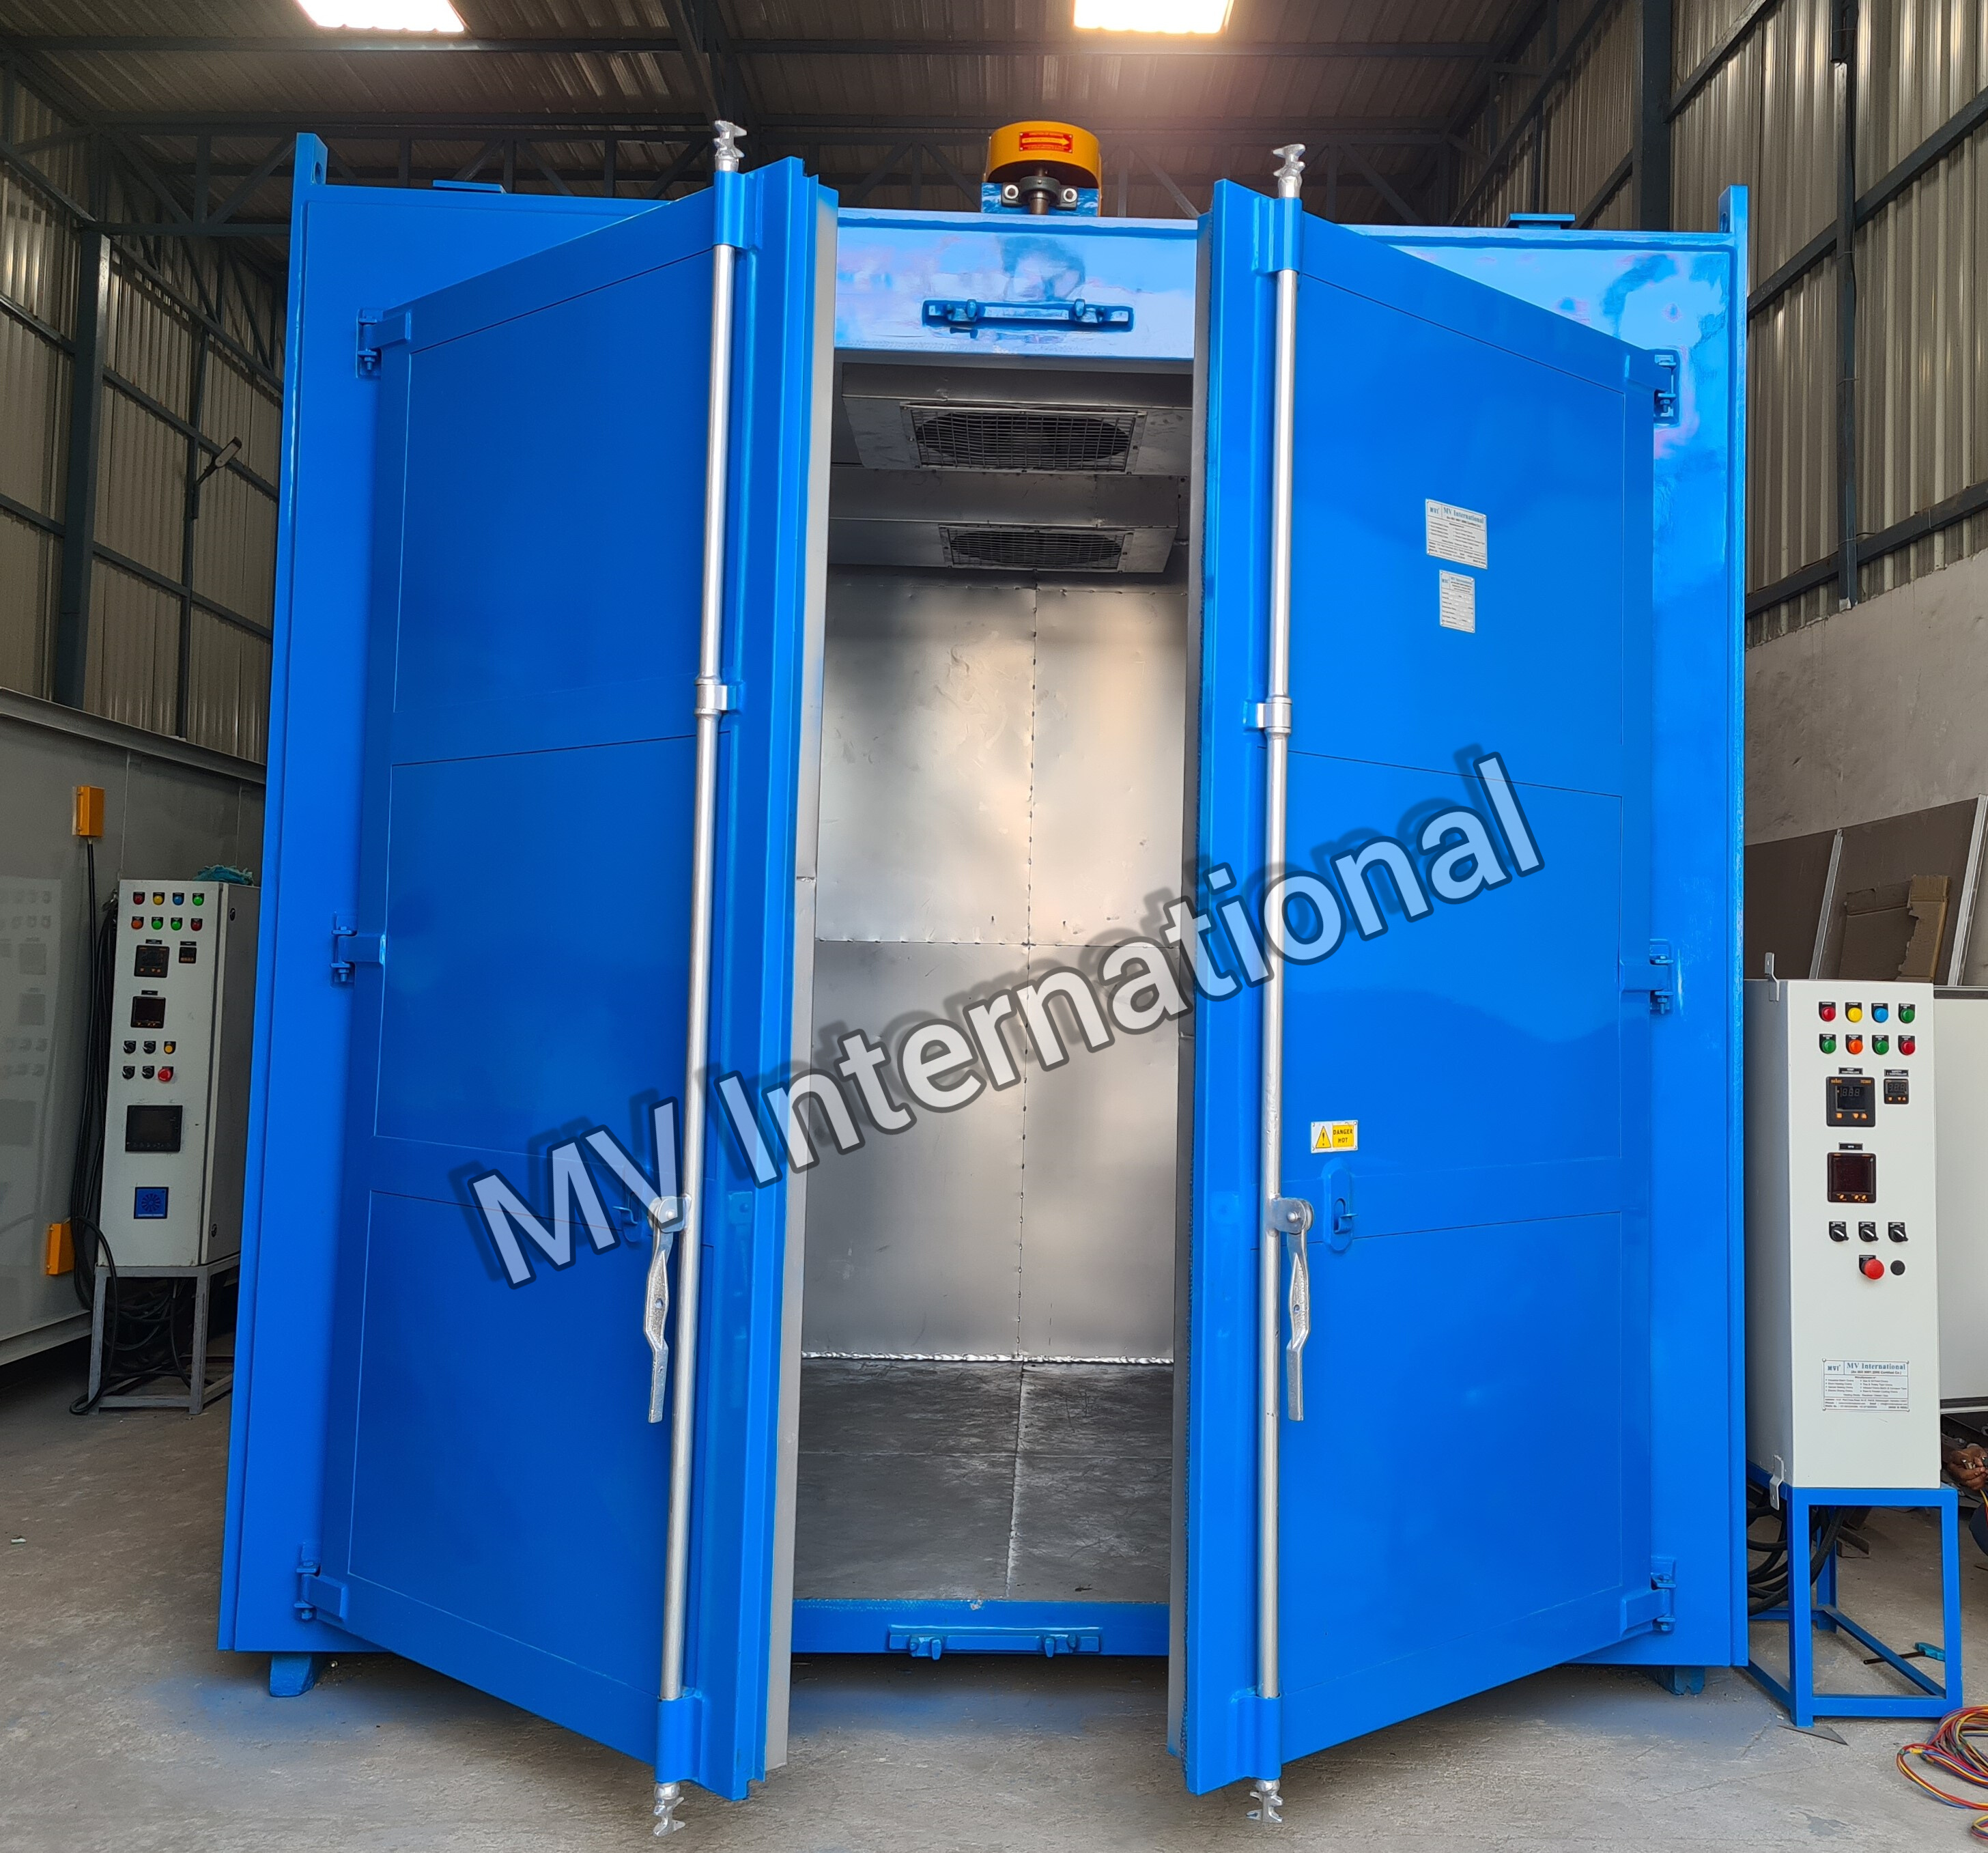 https://www.industrialoven.com/images/product/composite-curing-oven1.jpg